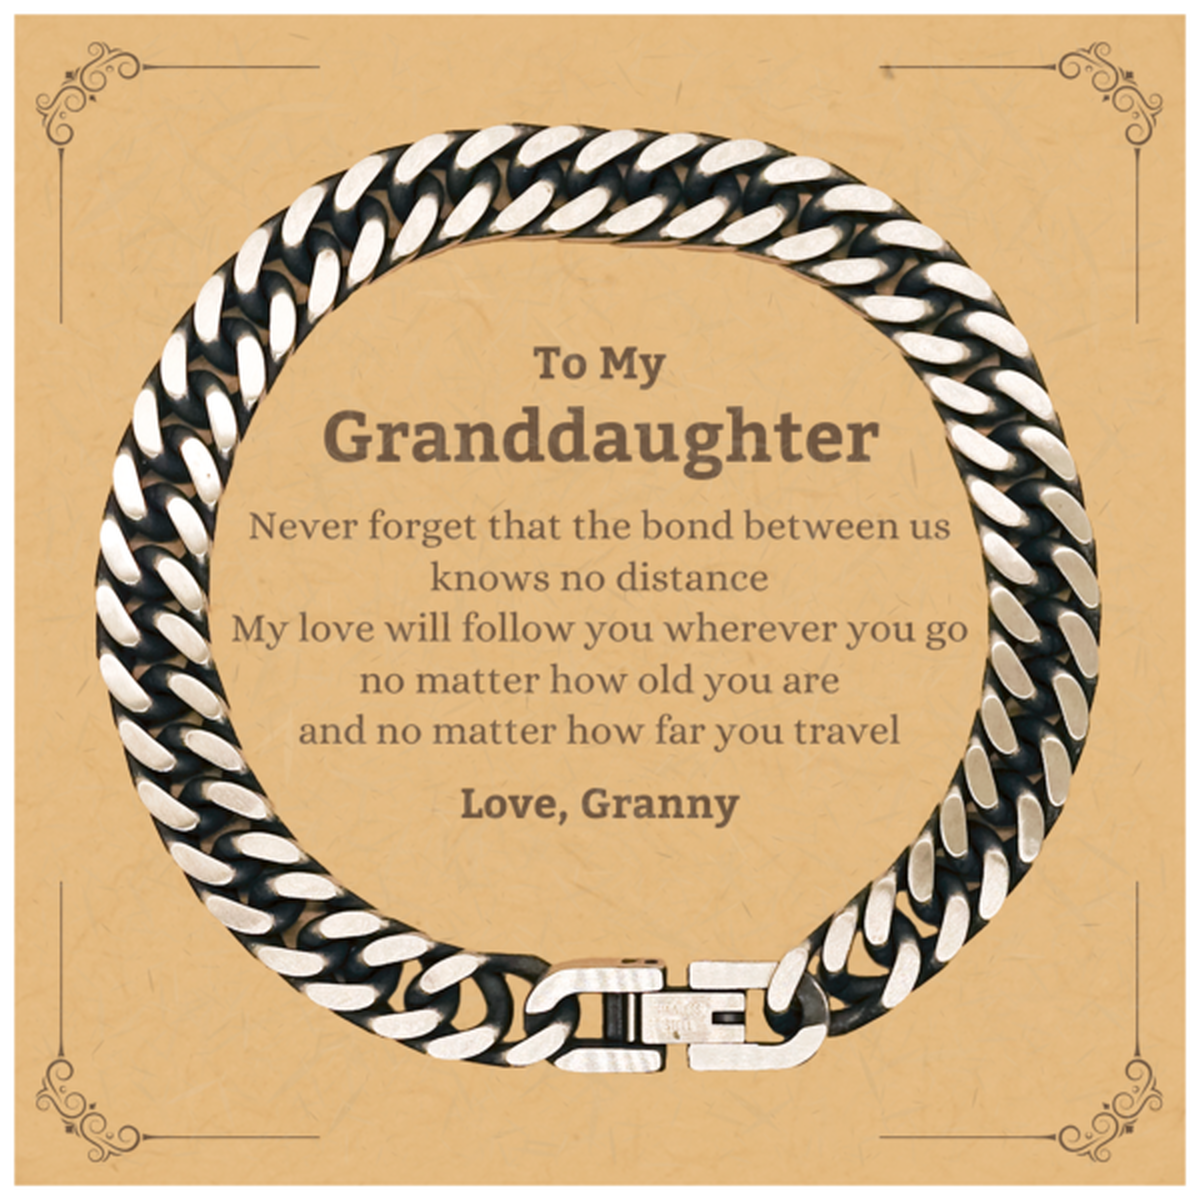 Granddaughter Birthday Gifts from Granny, Adjustable Cuban Link Chain Bracelet for Granddaughter Christmas Graduation Unique Gifts Granddaughter Never forget that the bond between us knows no distance. Love, Granny